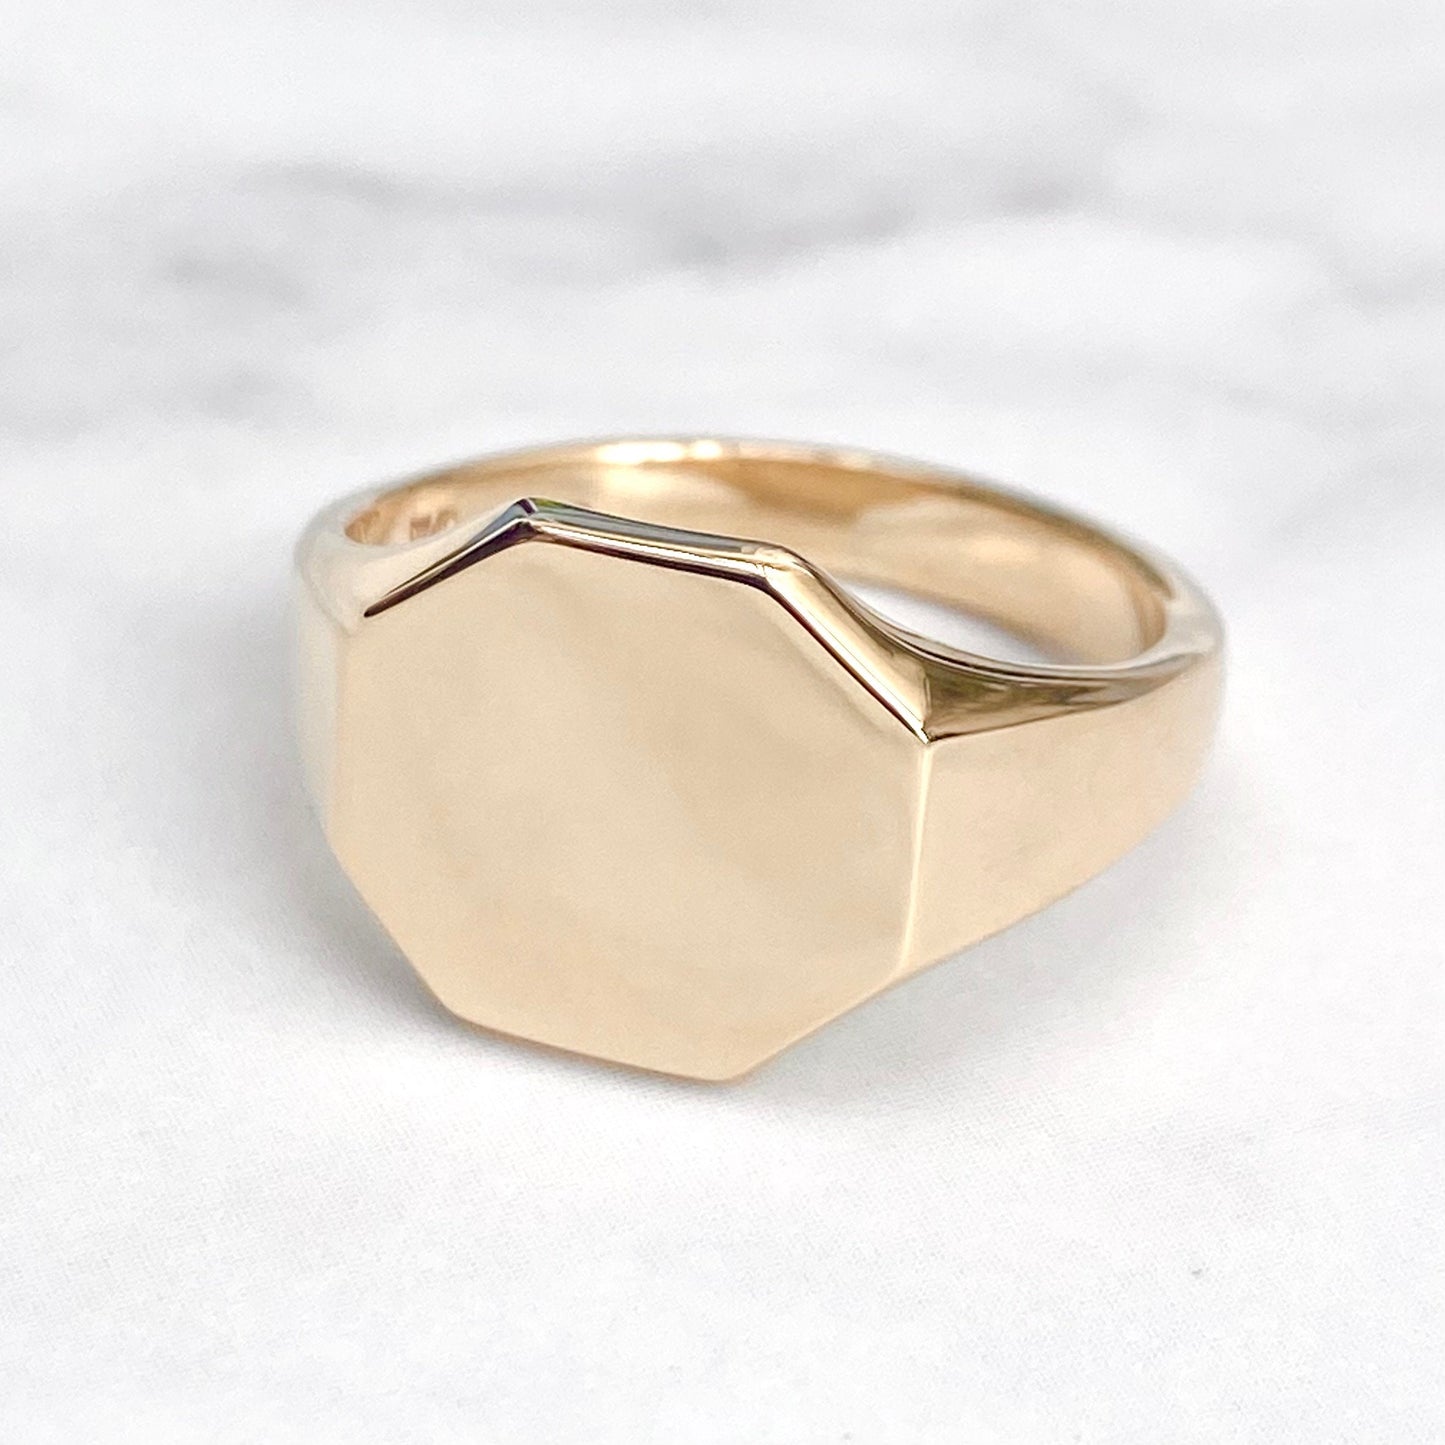 Vintage 9ct yellow gold octagonal signet ring - Can be hand engraved - UK size N 1/2 - US size 7 - British vintage jewellery